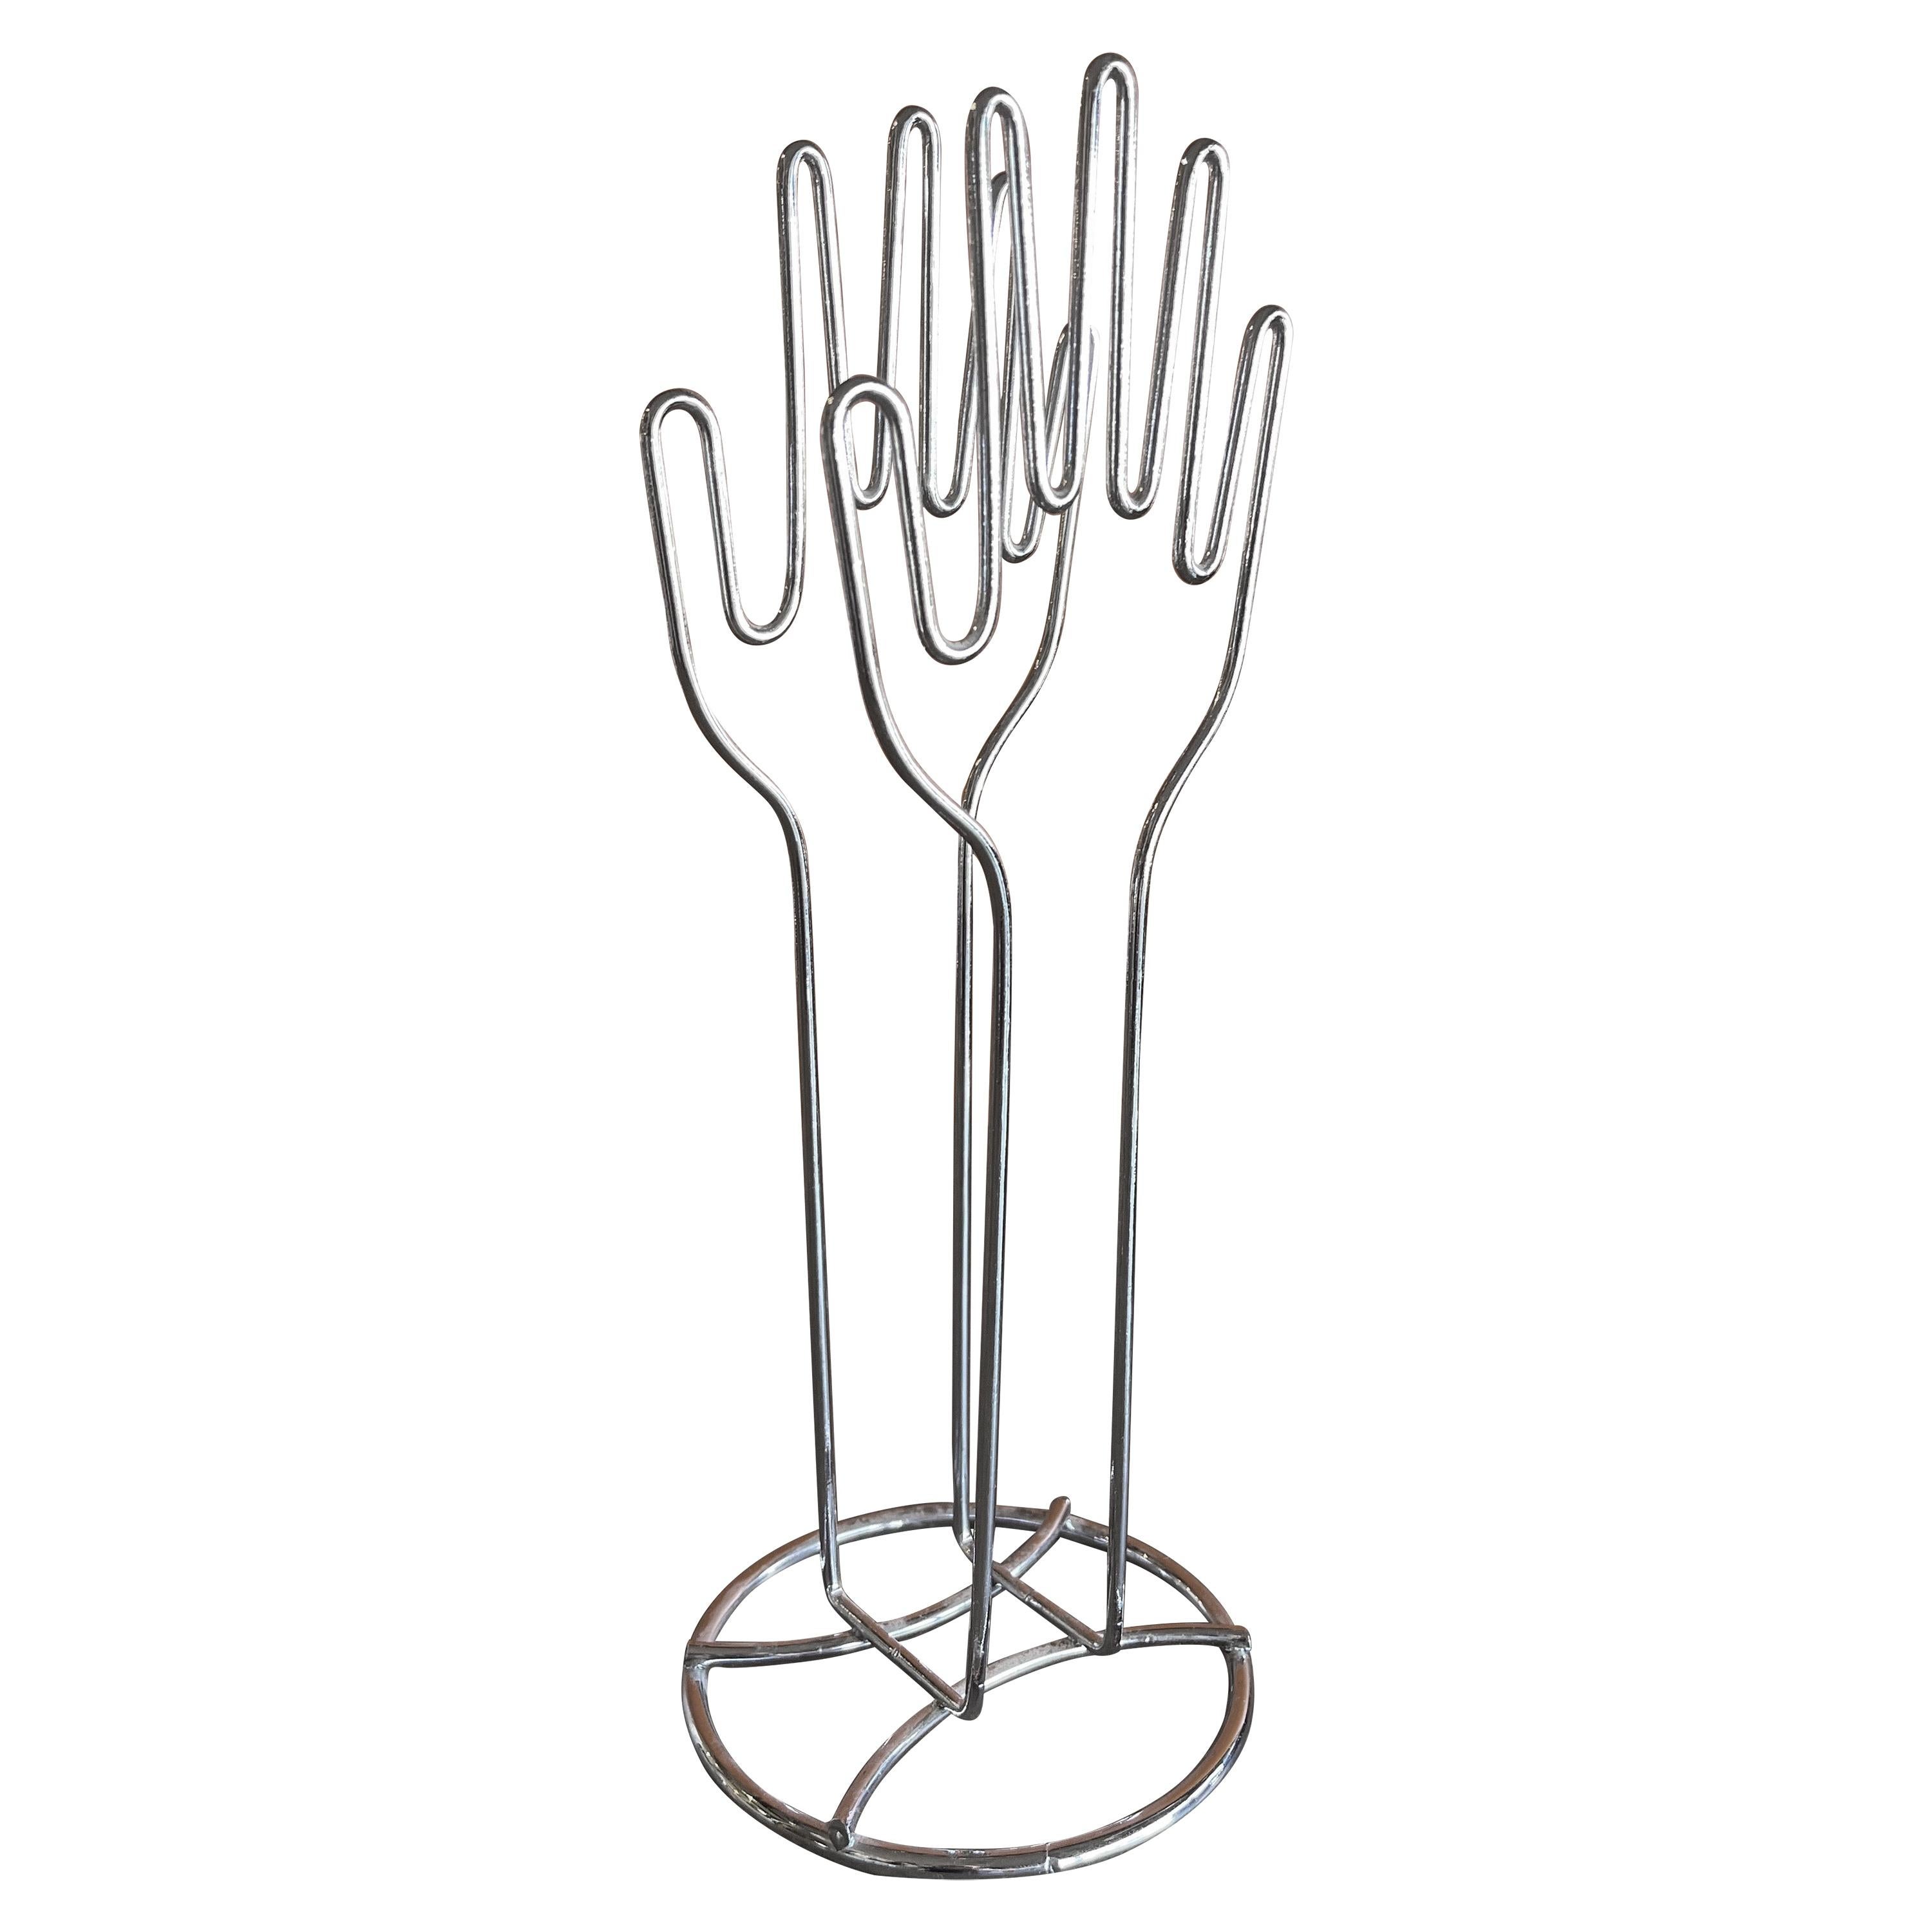 Clapping Hands Wire Sculpture Model / Paper Holder in Chrome For Sale